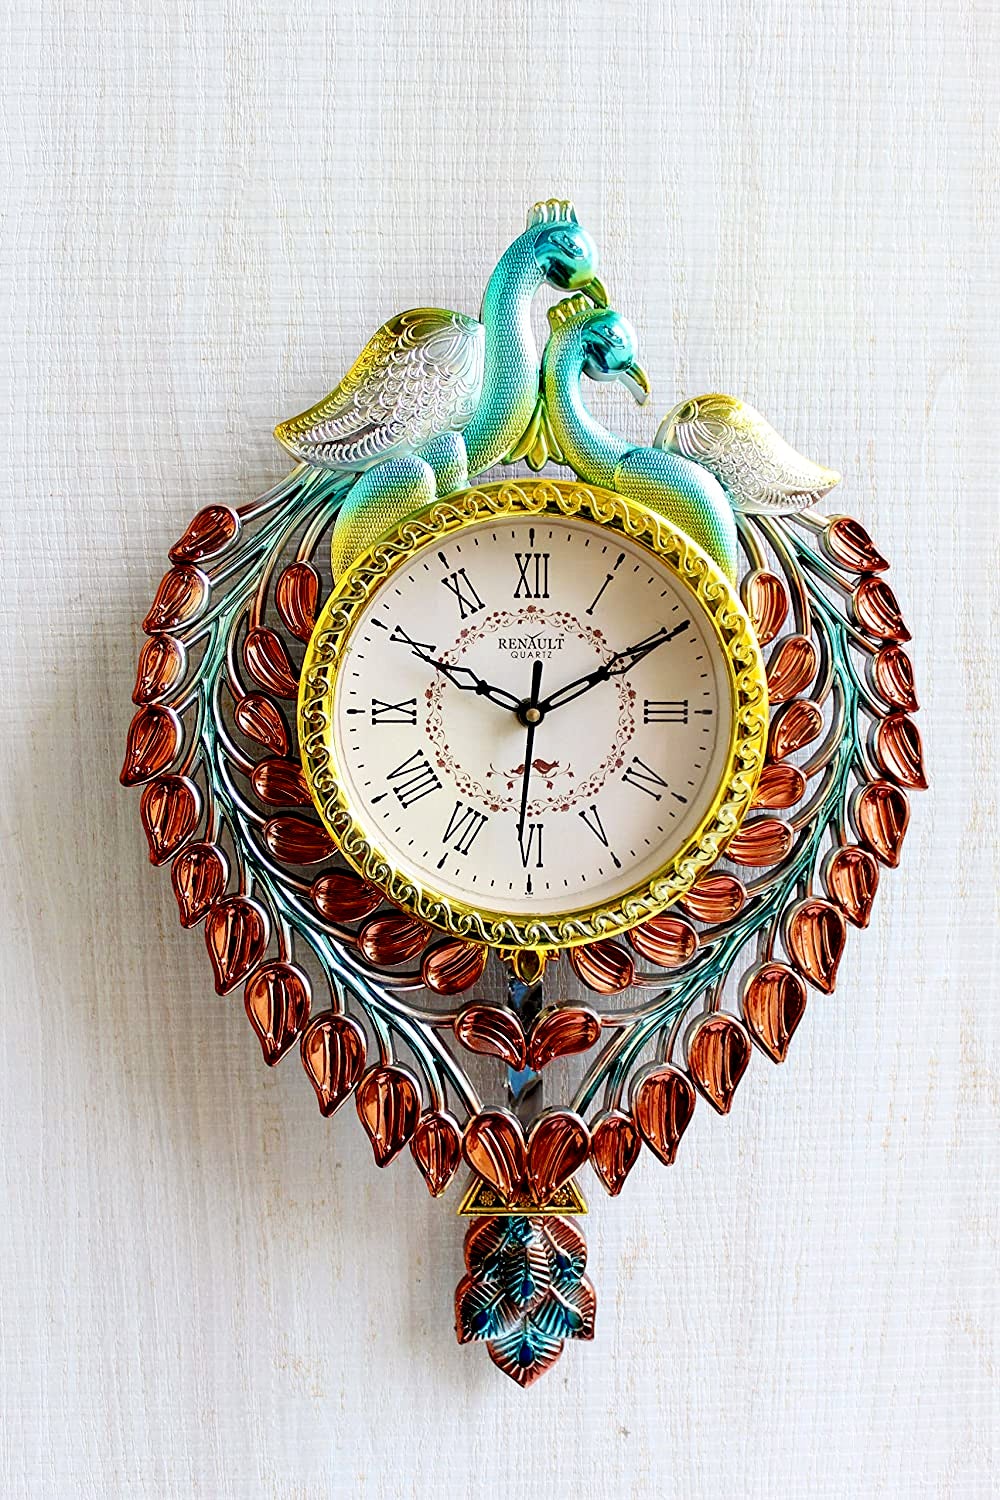 FunkyTradition Multicolored Beautiful Peacock Pendulum Wall Clock, Wall Watch, Wall Decor for Home Office Decor and Gifts 42 cm Tall